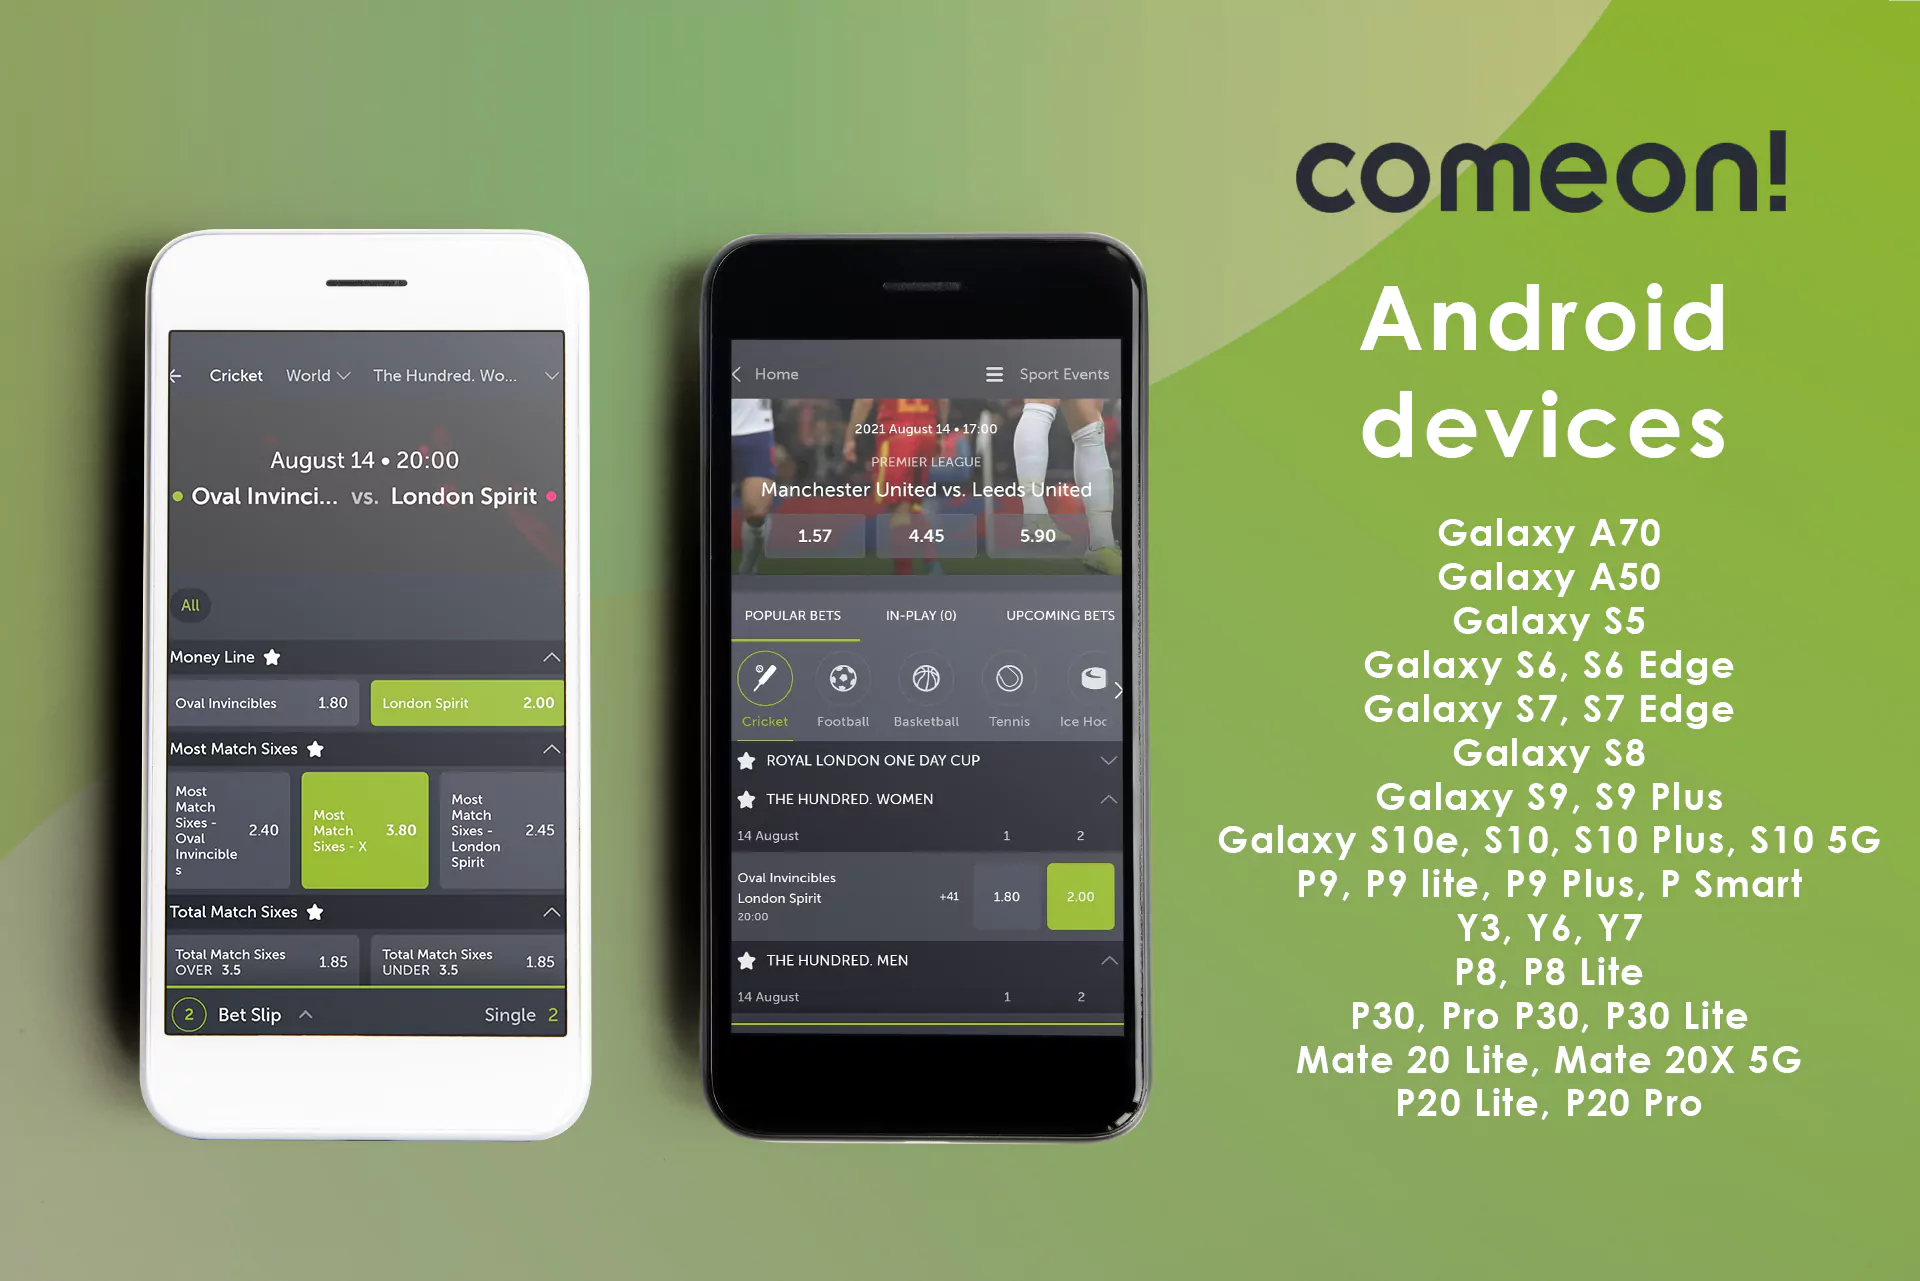 The Comeon app can be installed on almost all Android devices.